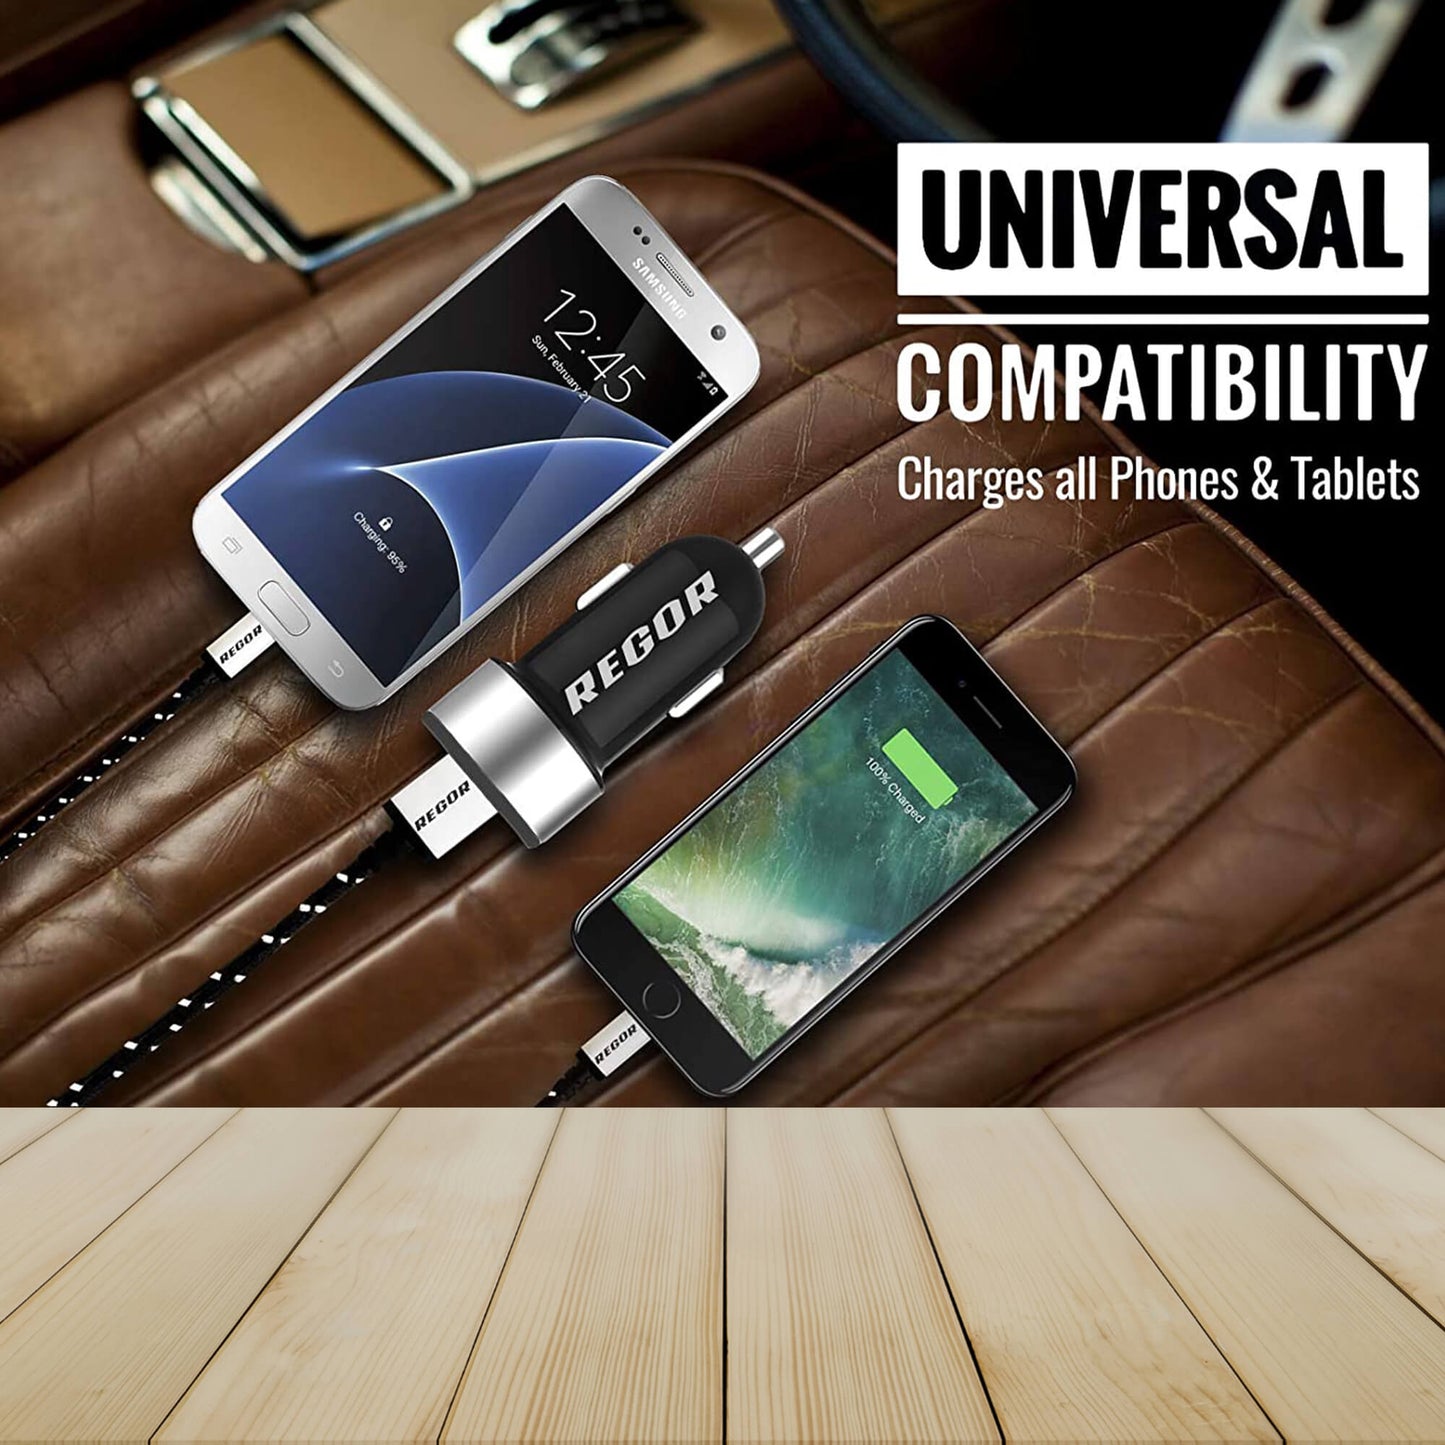 Regor [4.8Amp - 2 Port] High Speed Car Charger for All Smartphones & Tablets + Free Micro USB Cable.